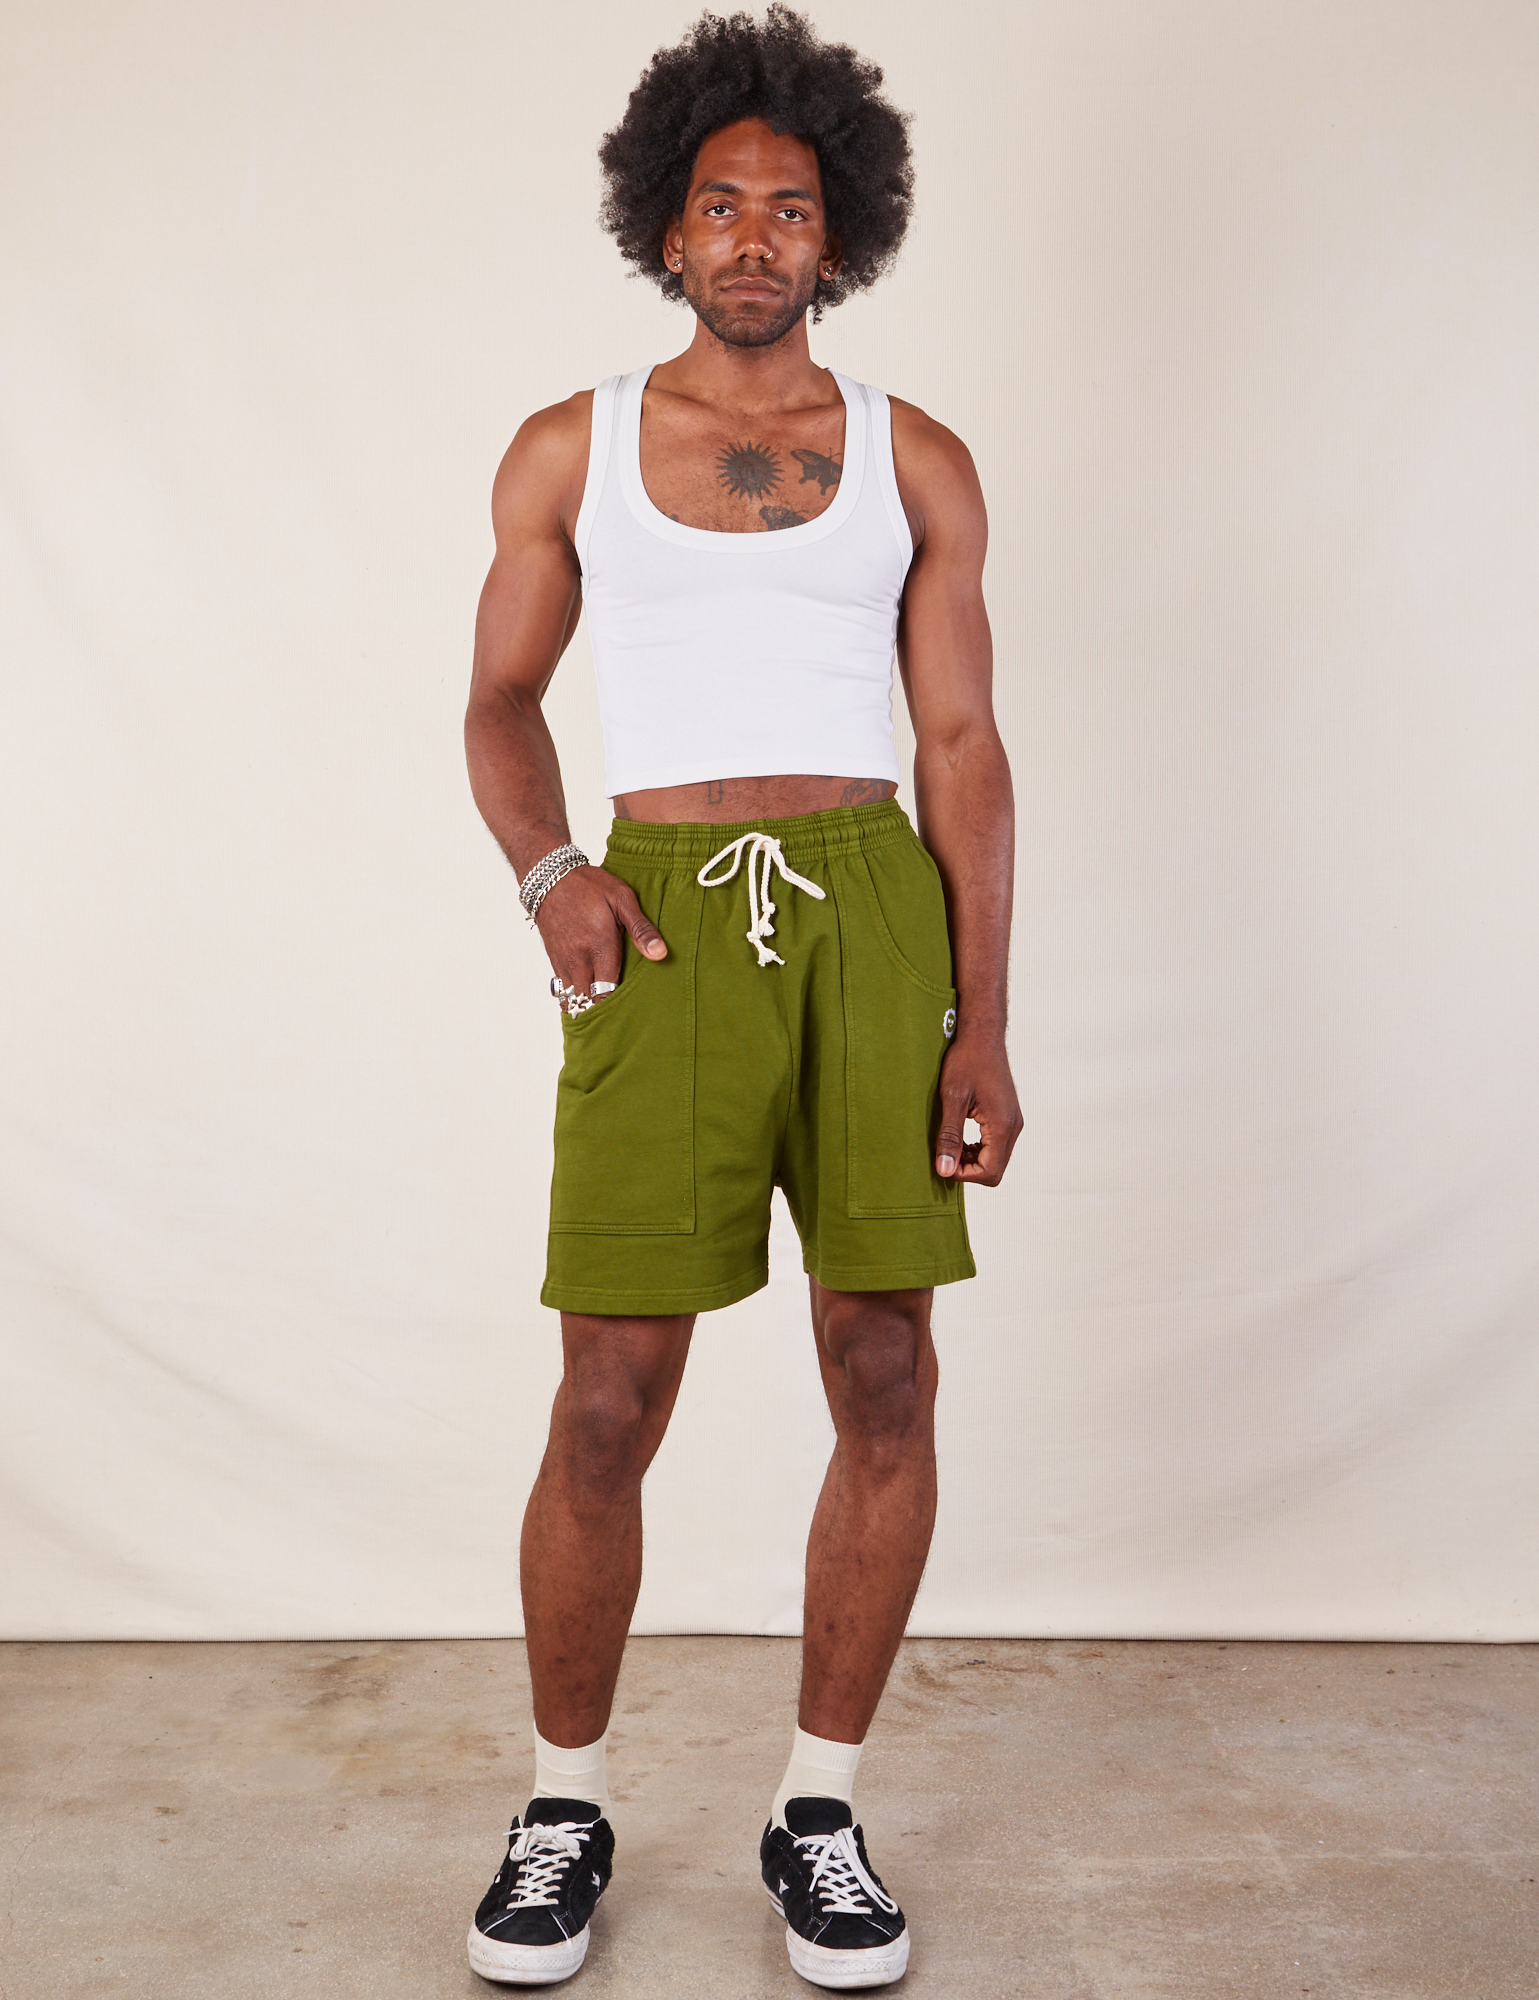 Jerrod is 6’3” and wearing S Lightweight Sweat Shorts in Summer Olive paired with a Cropped Tank in vintage tee off-white